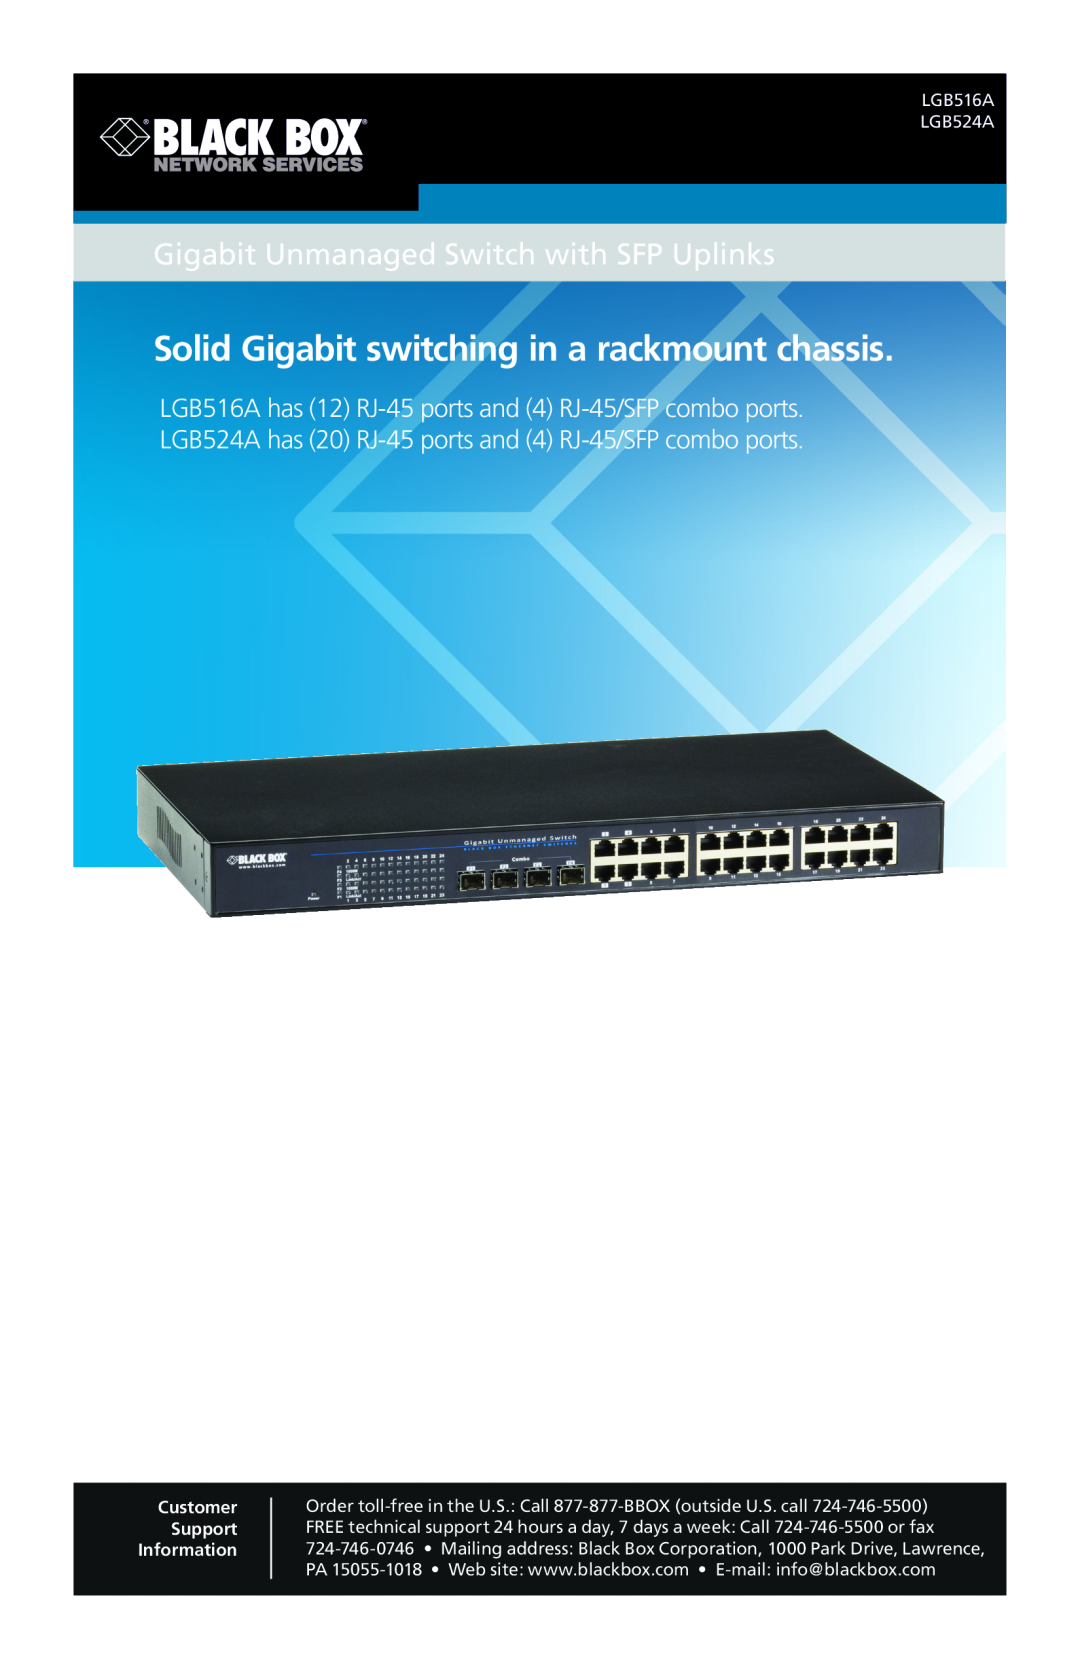 Black Box lgb516a manual Gigabit Unmanaged Switch with SFP Uplinks, Solid Gigabit switching in a rackmount chassis 